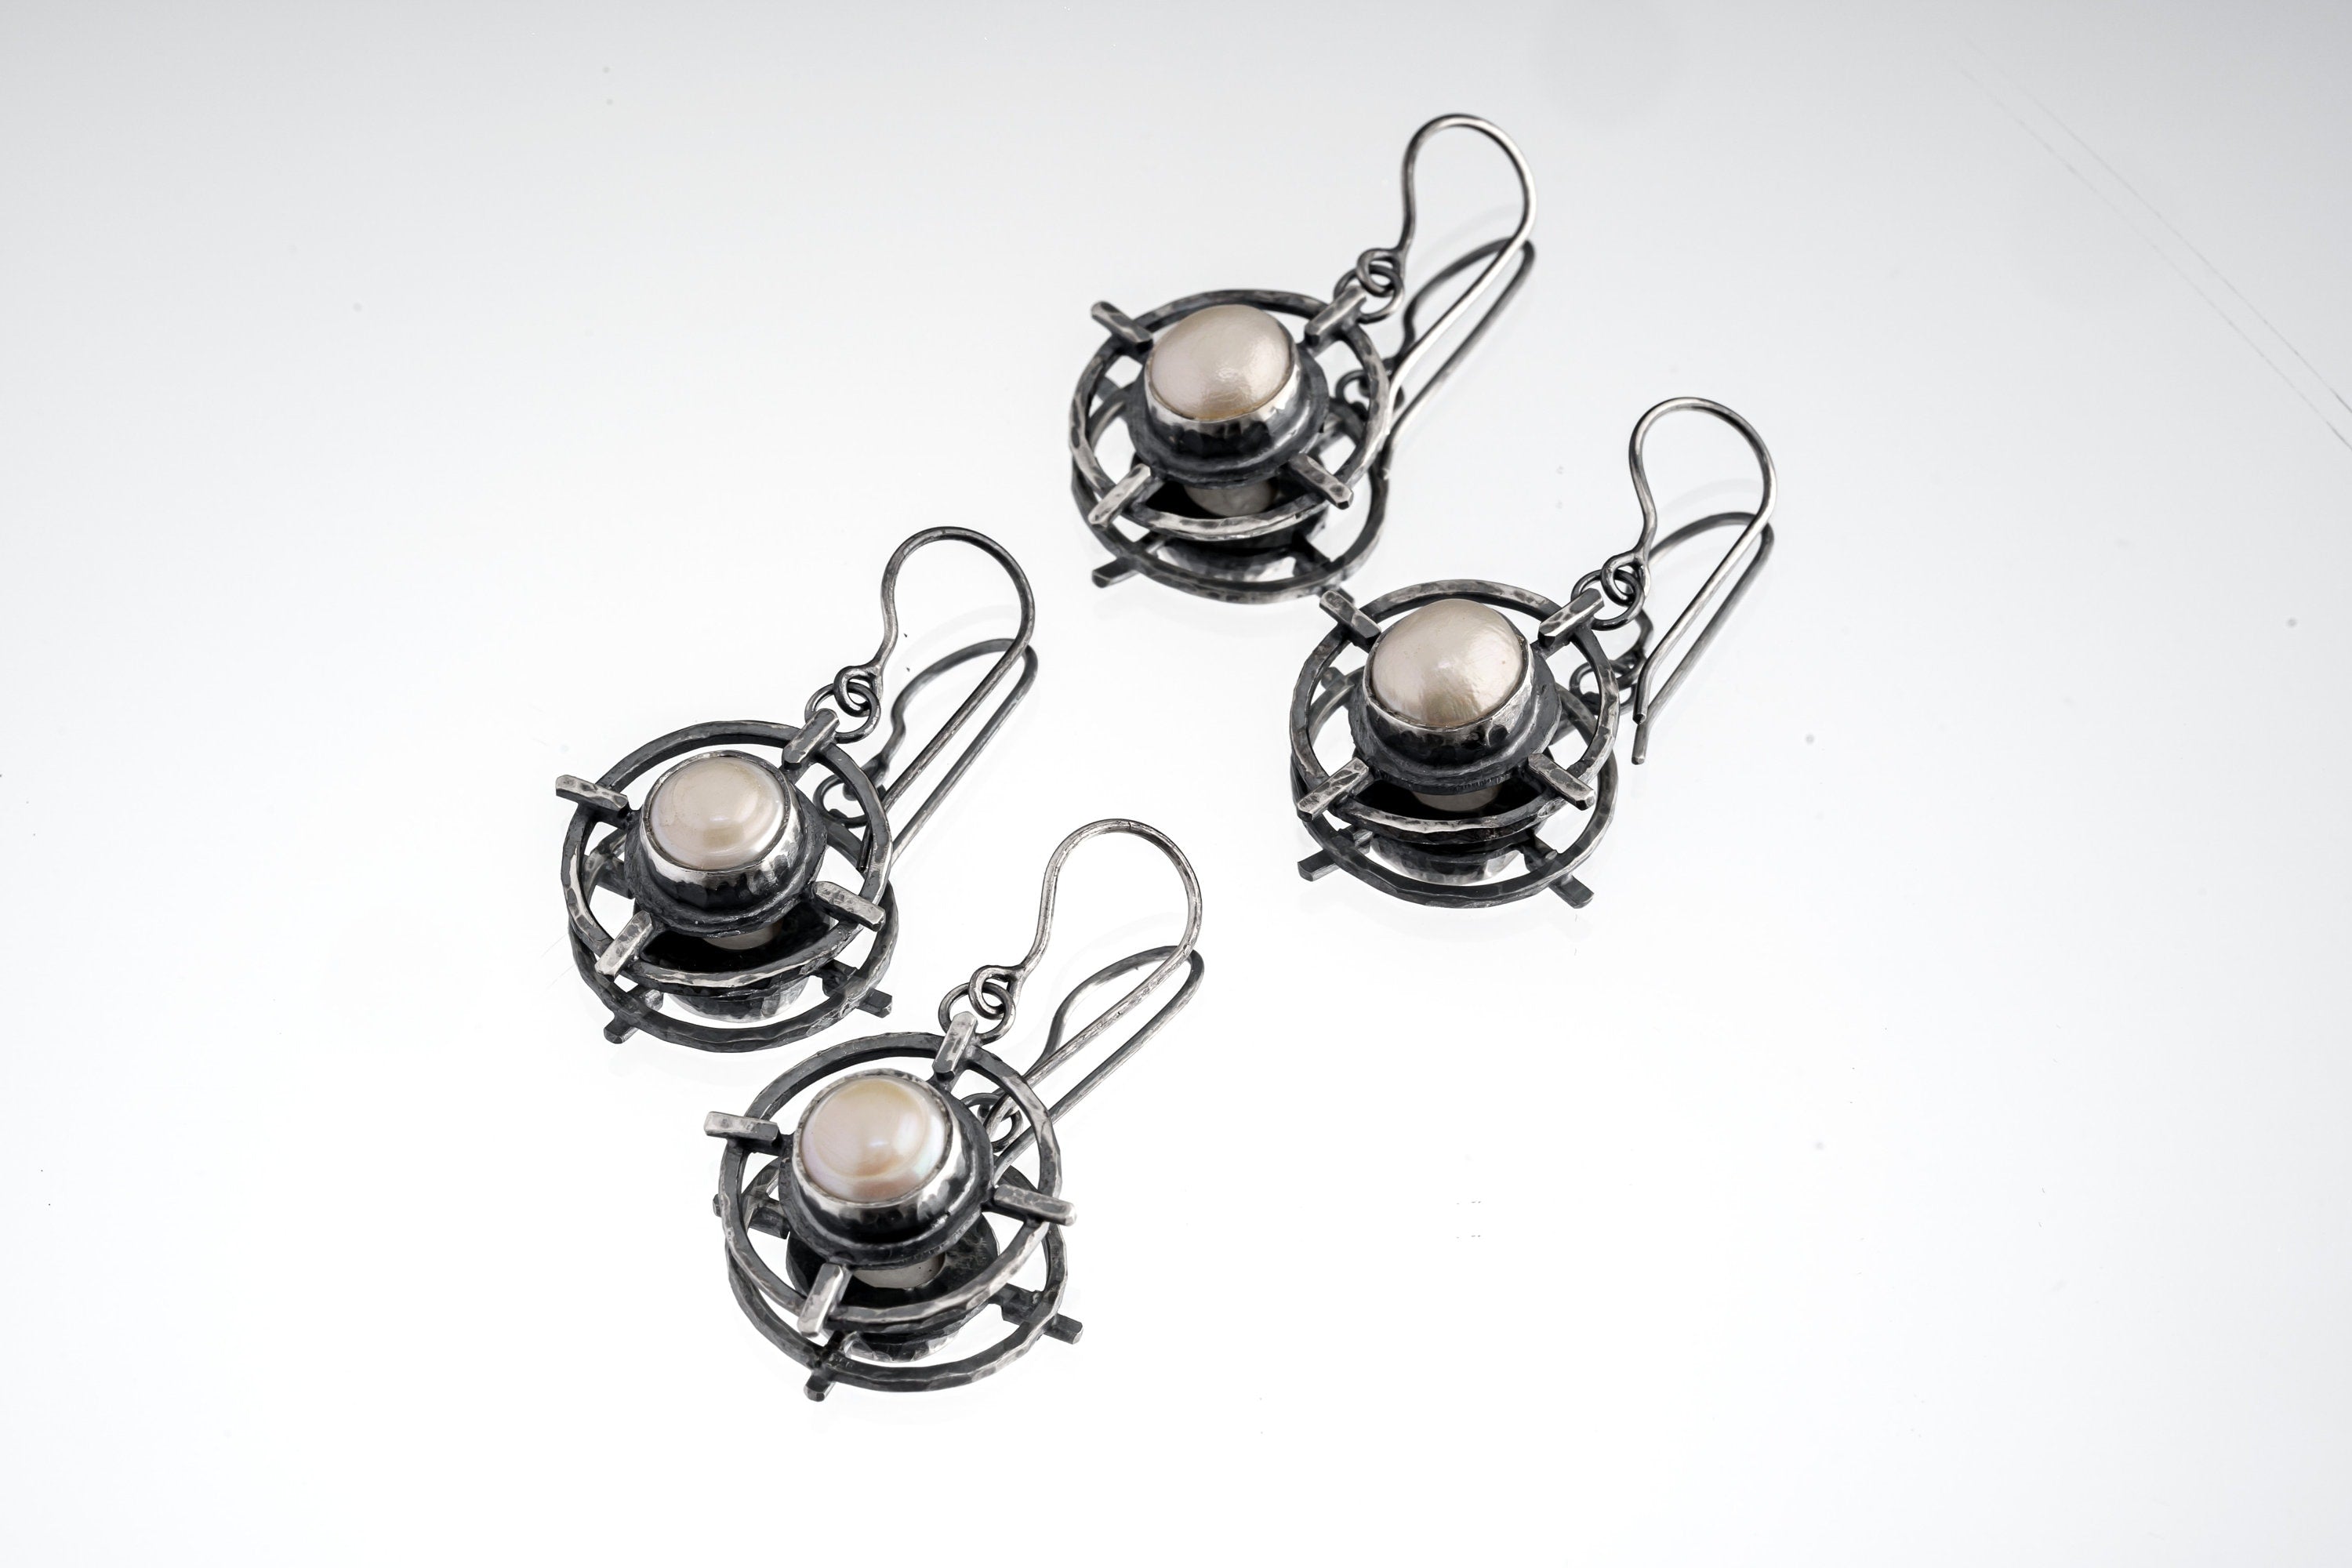 South Sea Pearls - Oxidised Rustick Boho Vibe - 925 Sterling Silver - Intricately Layered & Textured Old World Vibe Earring Pair